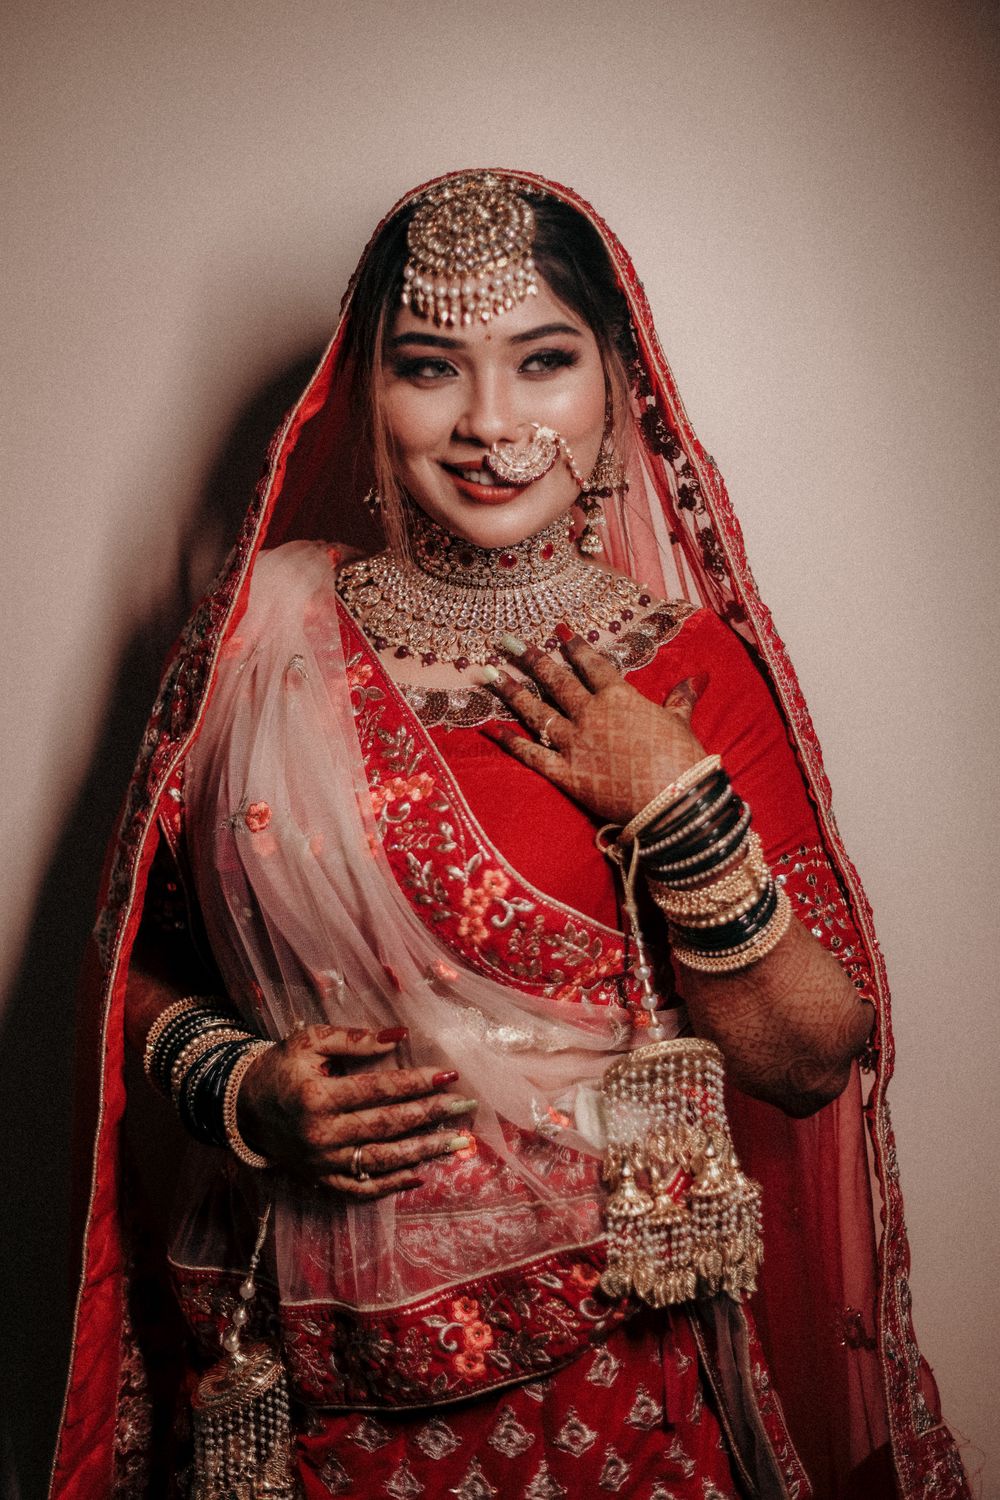 Photo From Wedding  - By Anjali Babar Makeup Artist